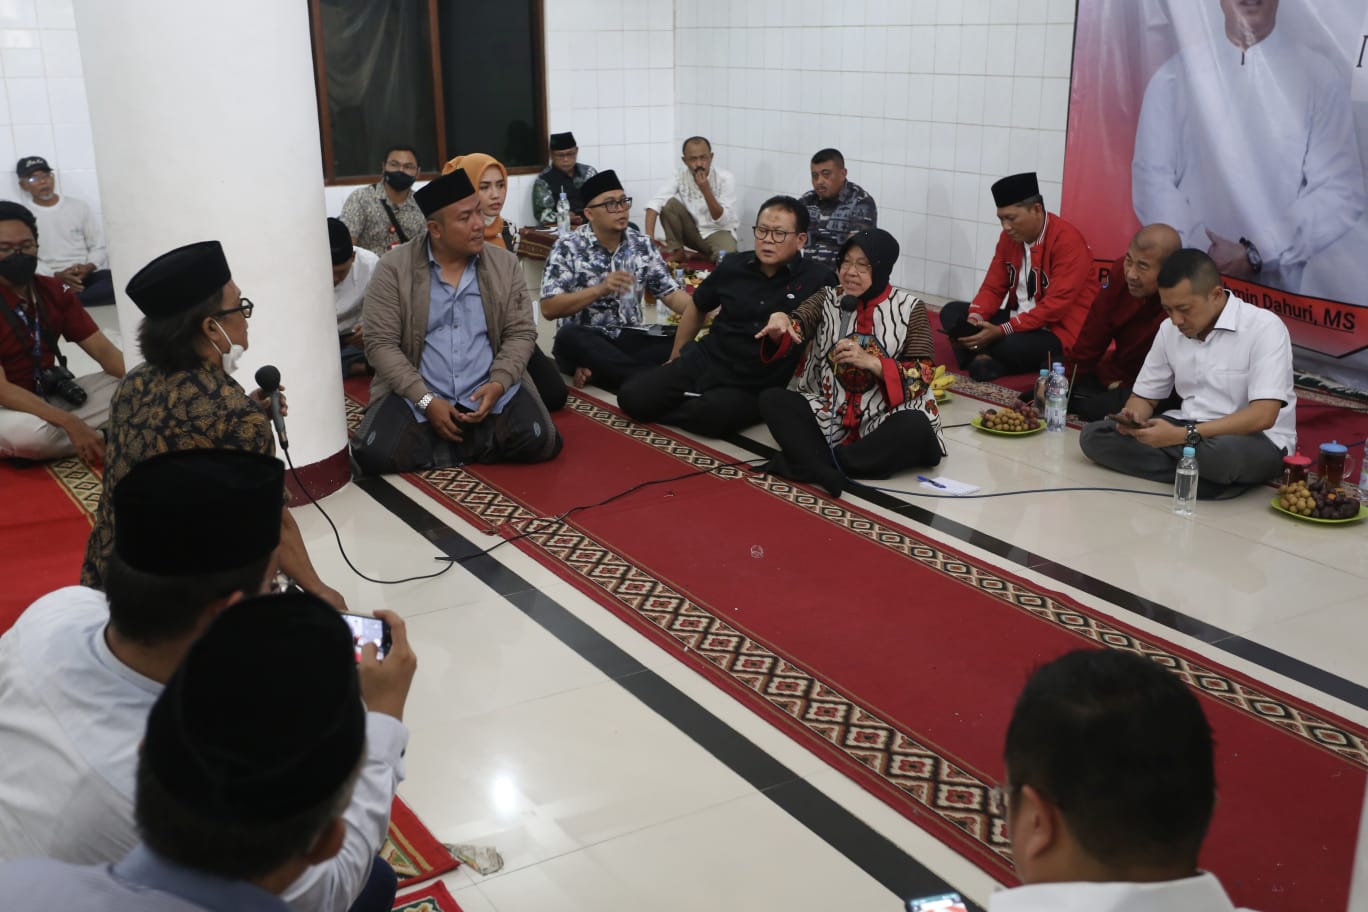 Social Affairs Minister Has an Aspiration Discussion with the Fishermen in Cilincing Jakarta